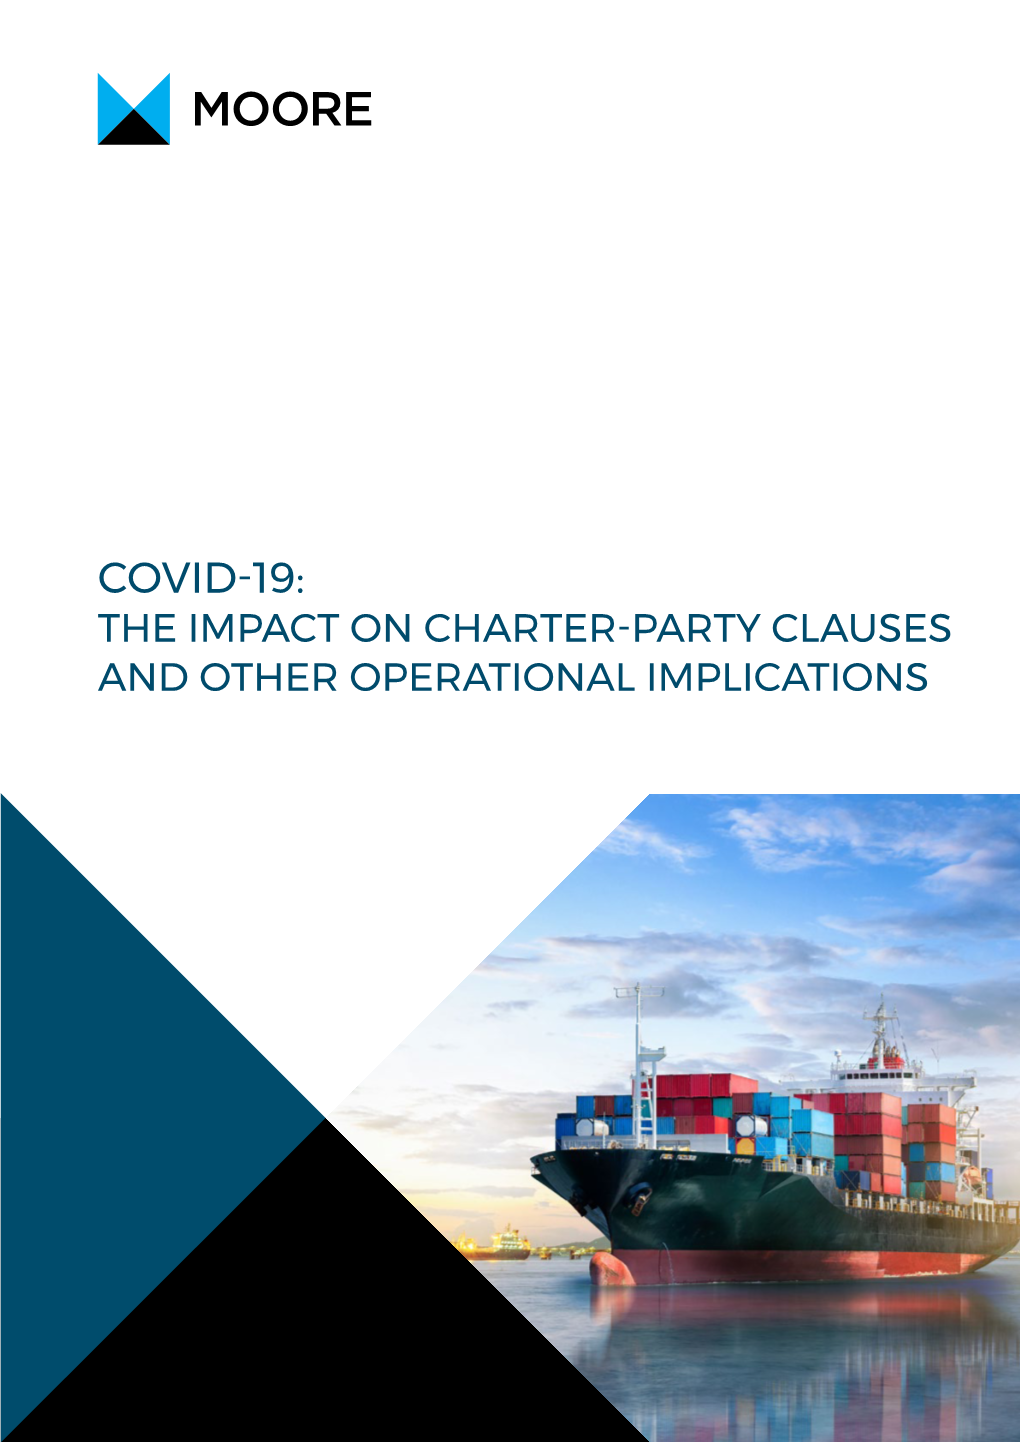 Covid-19: the Impact on Charter-Party Clauses and Other Operational Implications